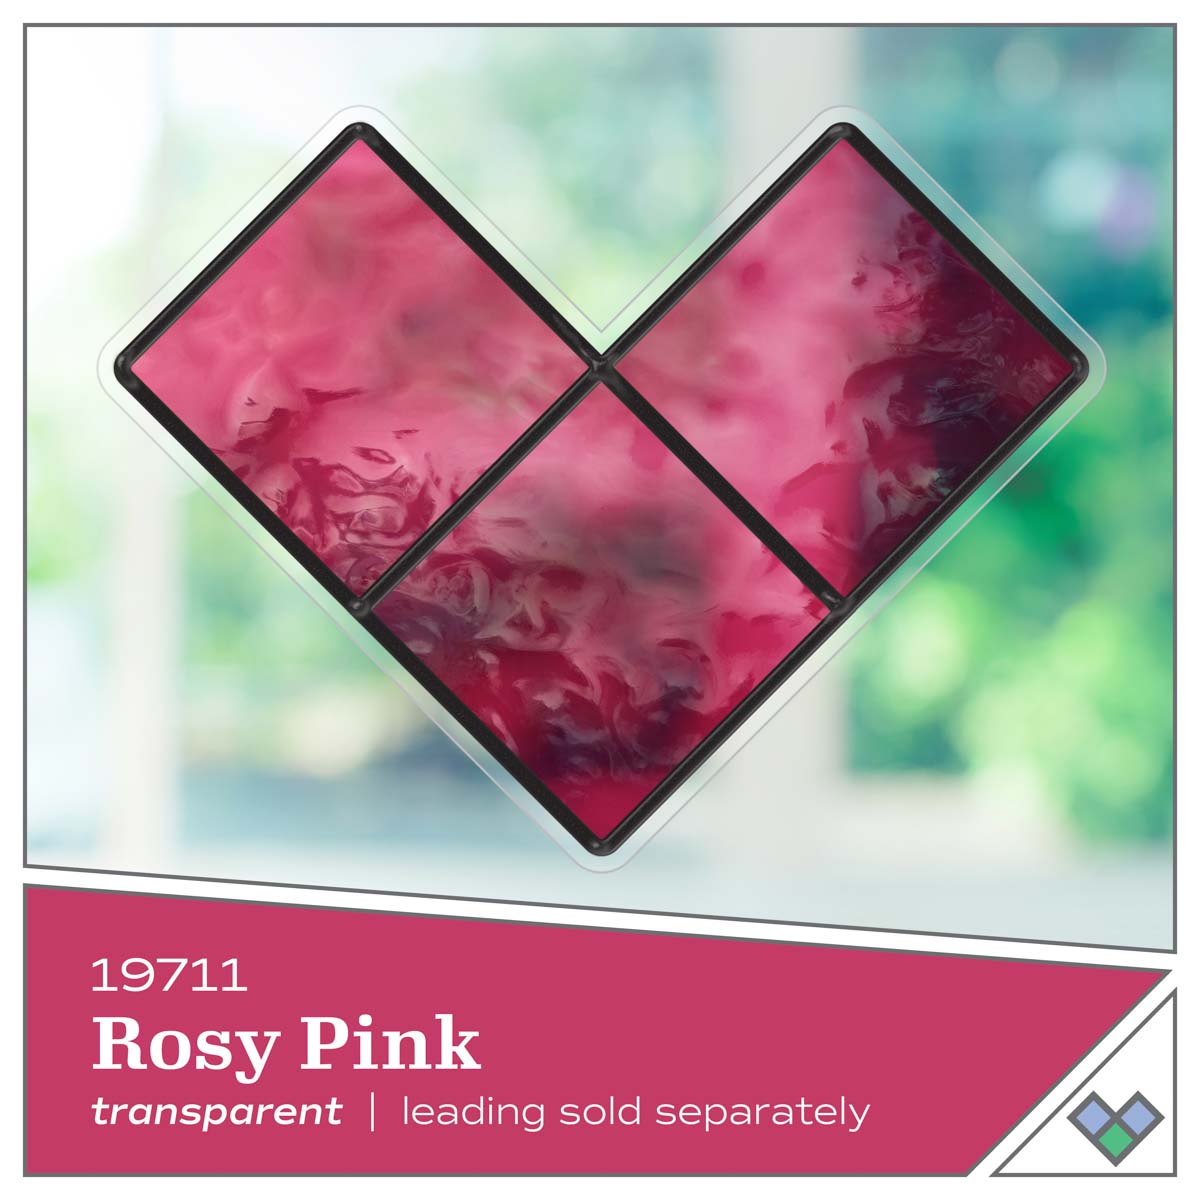 Gallery Glass ® Stained Glass Effect Paint - Rosy Pink, 2 oz. - 19711